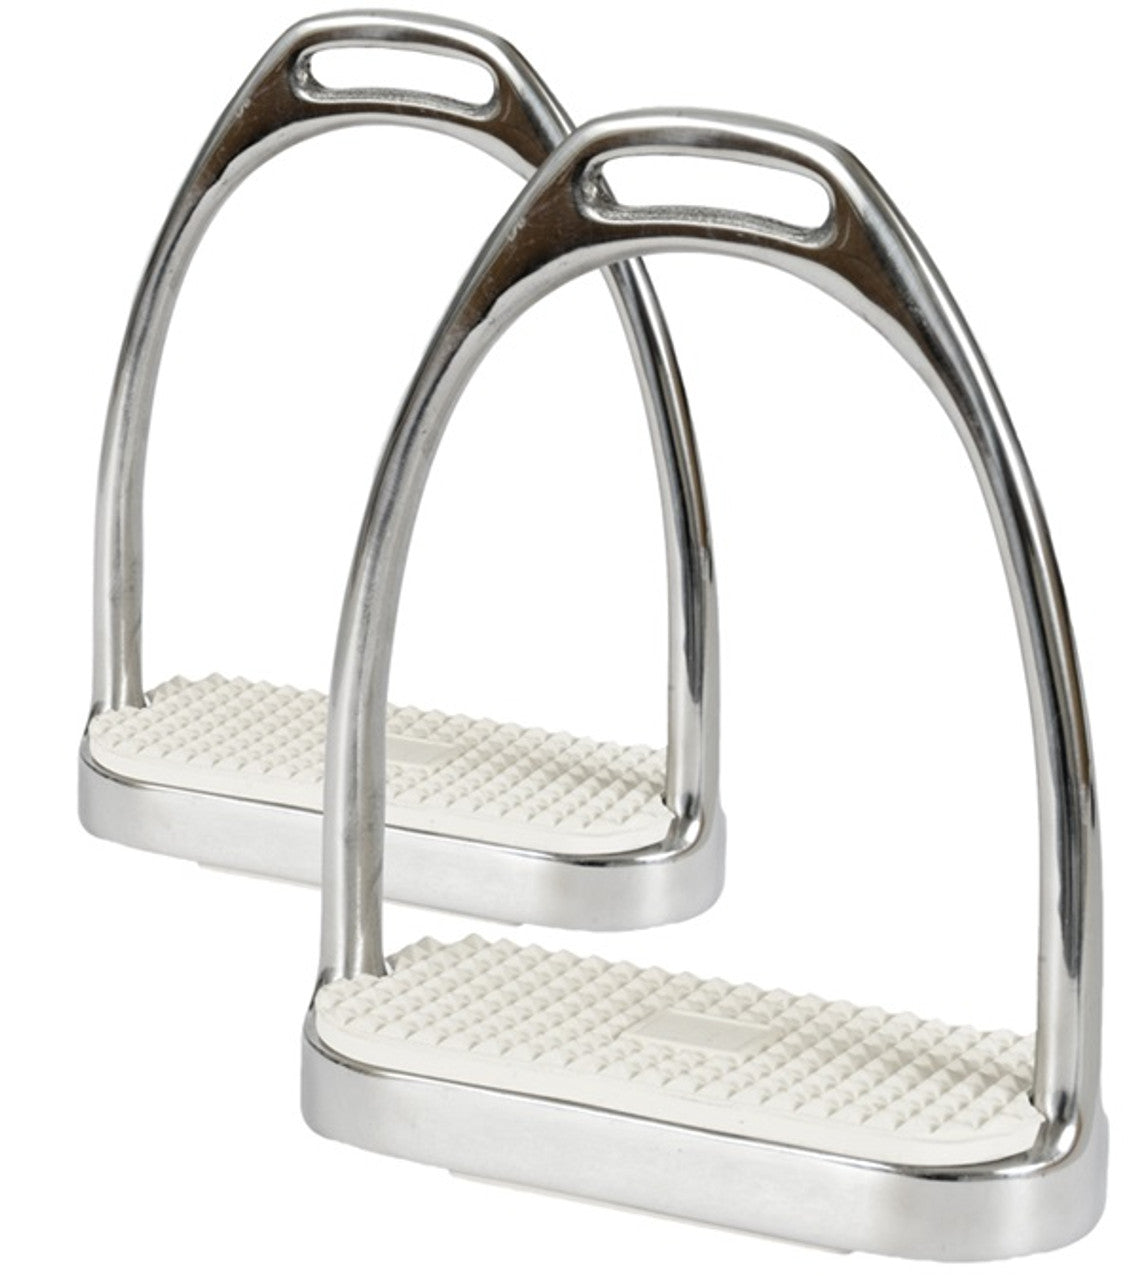 Stainless Steel Fillis Stirrups with White Pads-TexanSaddles.com